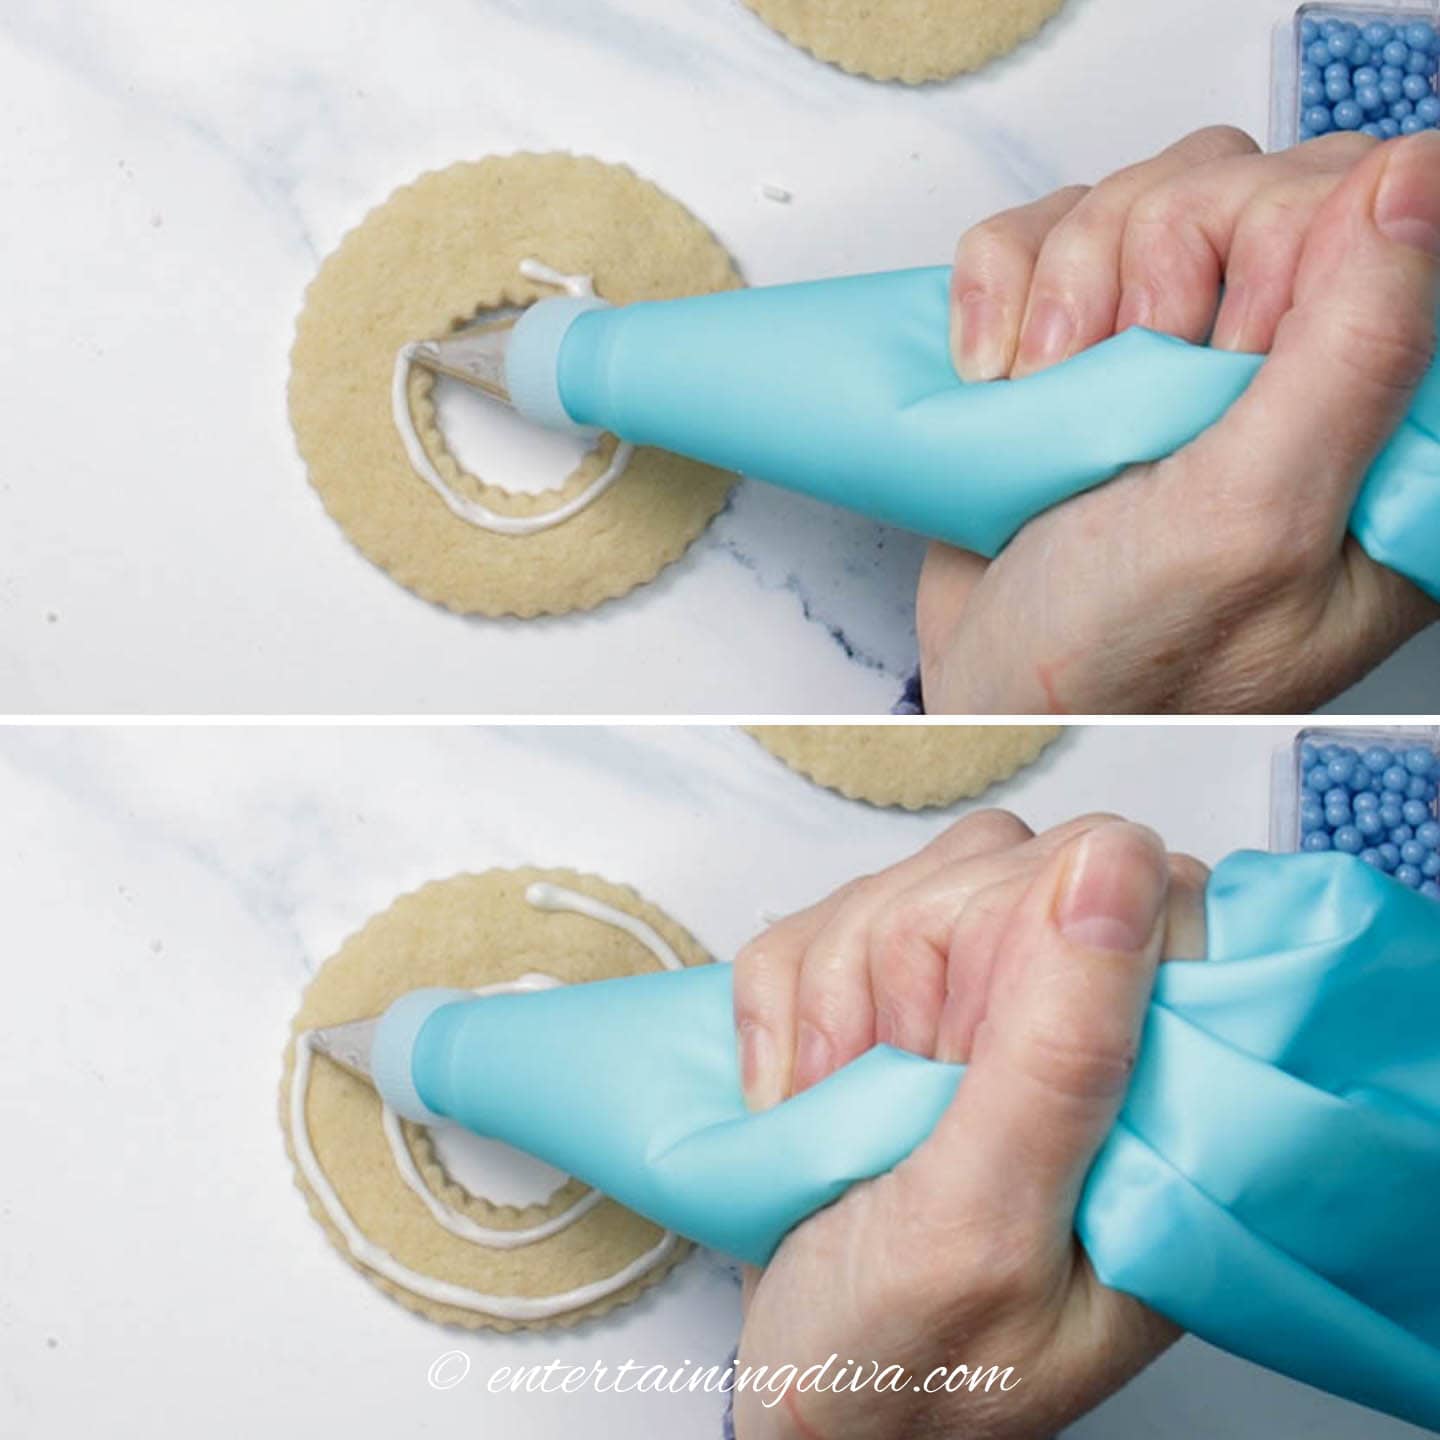 Outlining the inside and outside edges of the Christmas wreath cut out cookies with icing